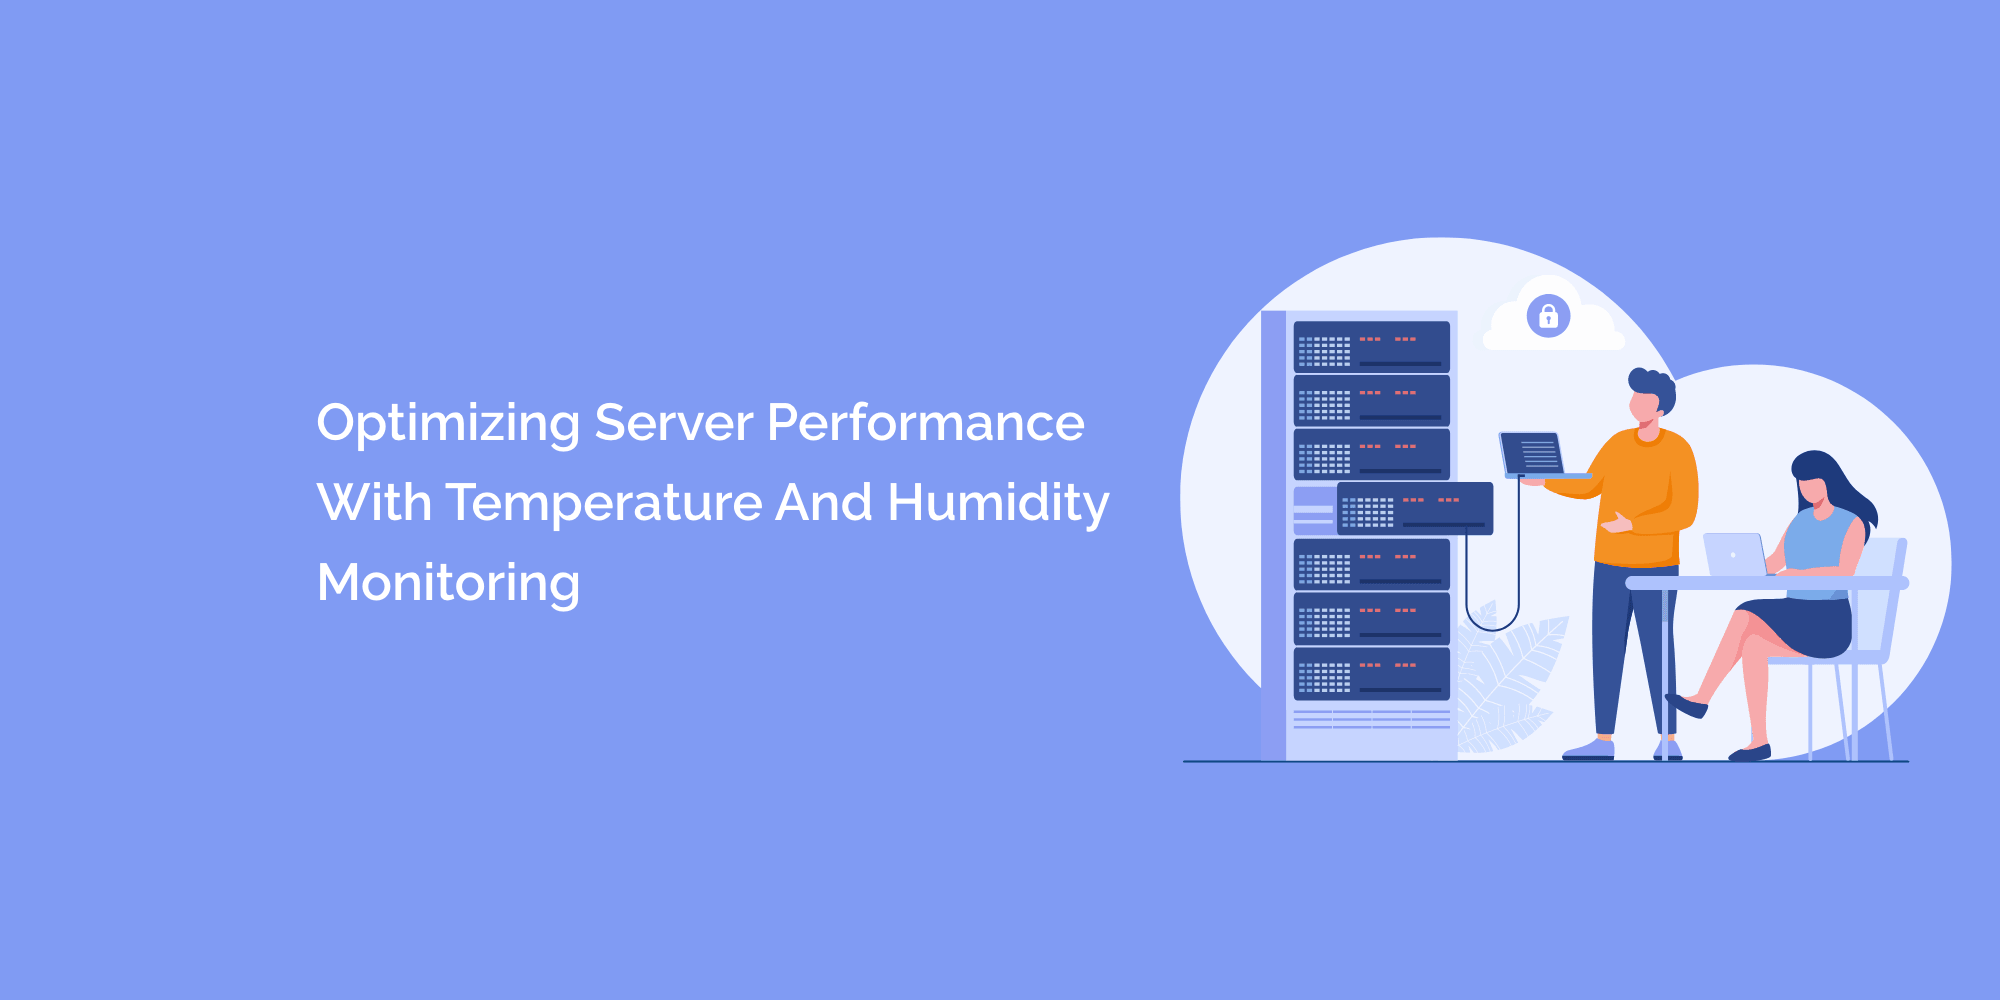 Optimizing Server Performance with Temperature and Humidity Monitoring